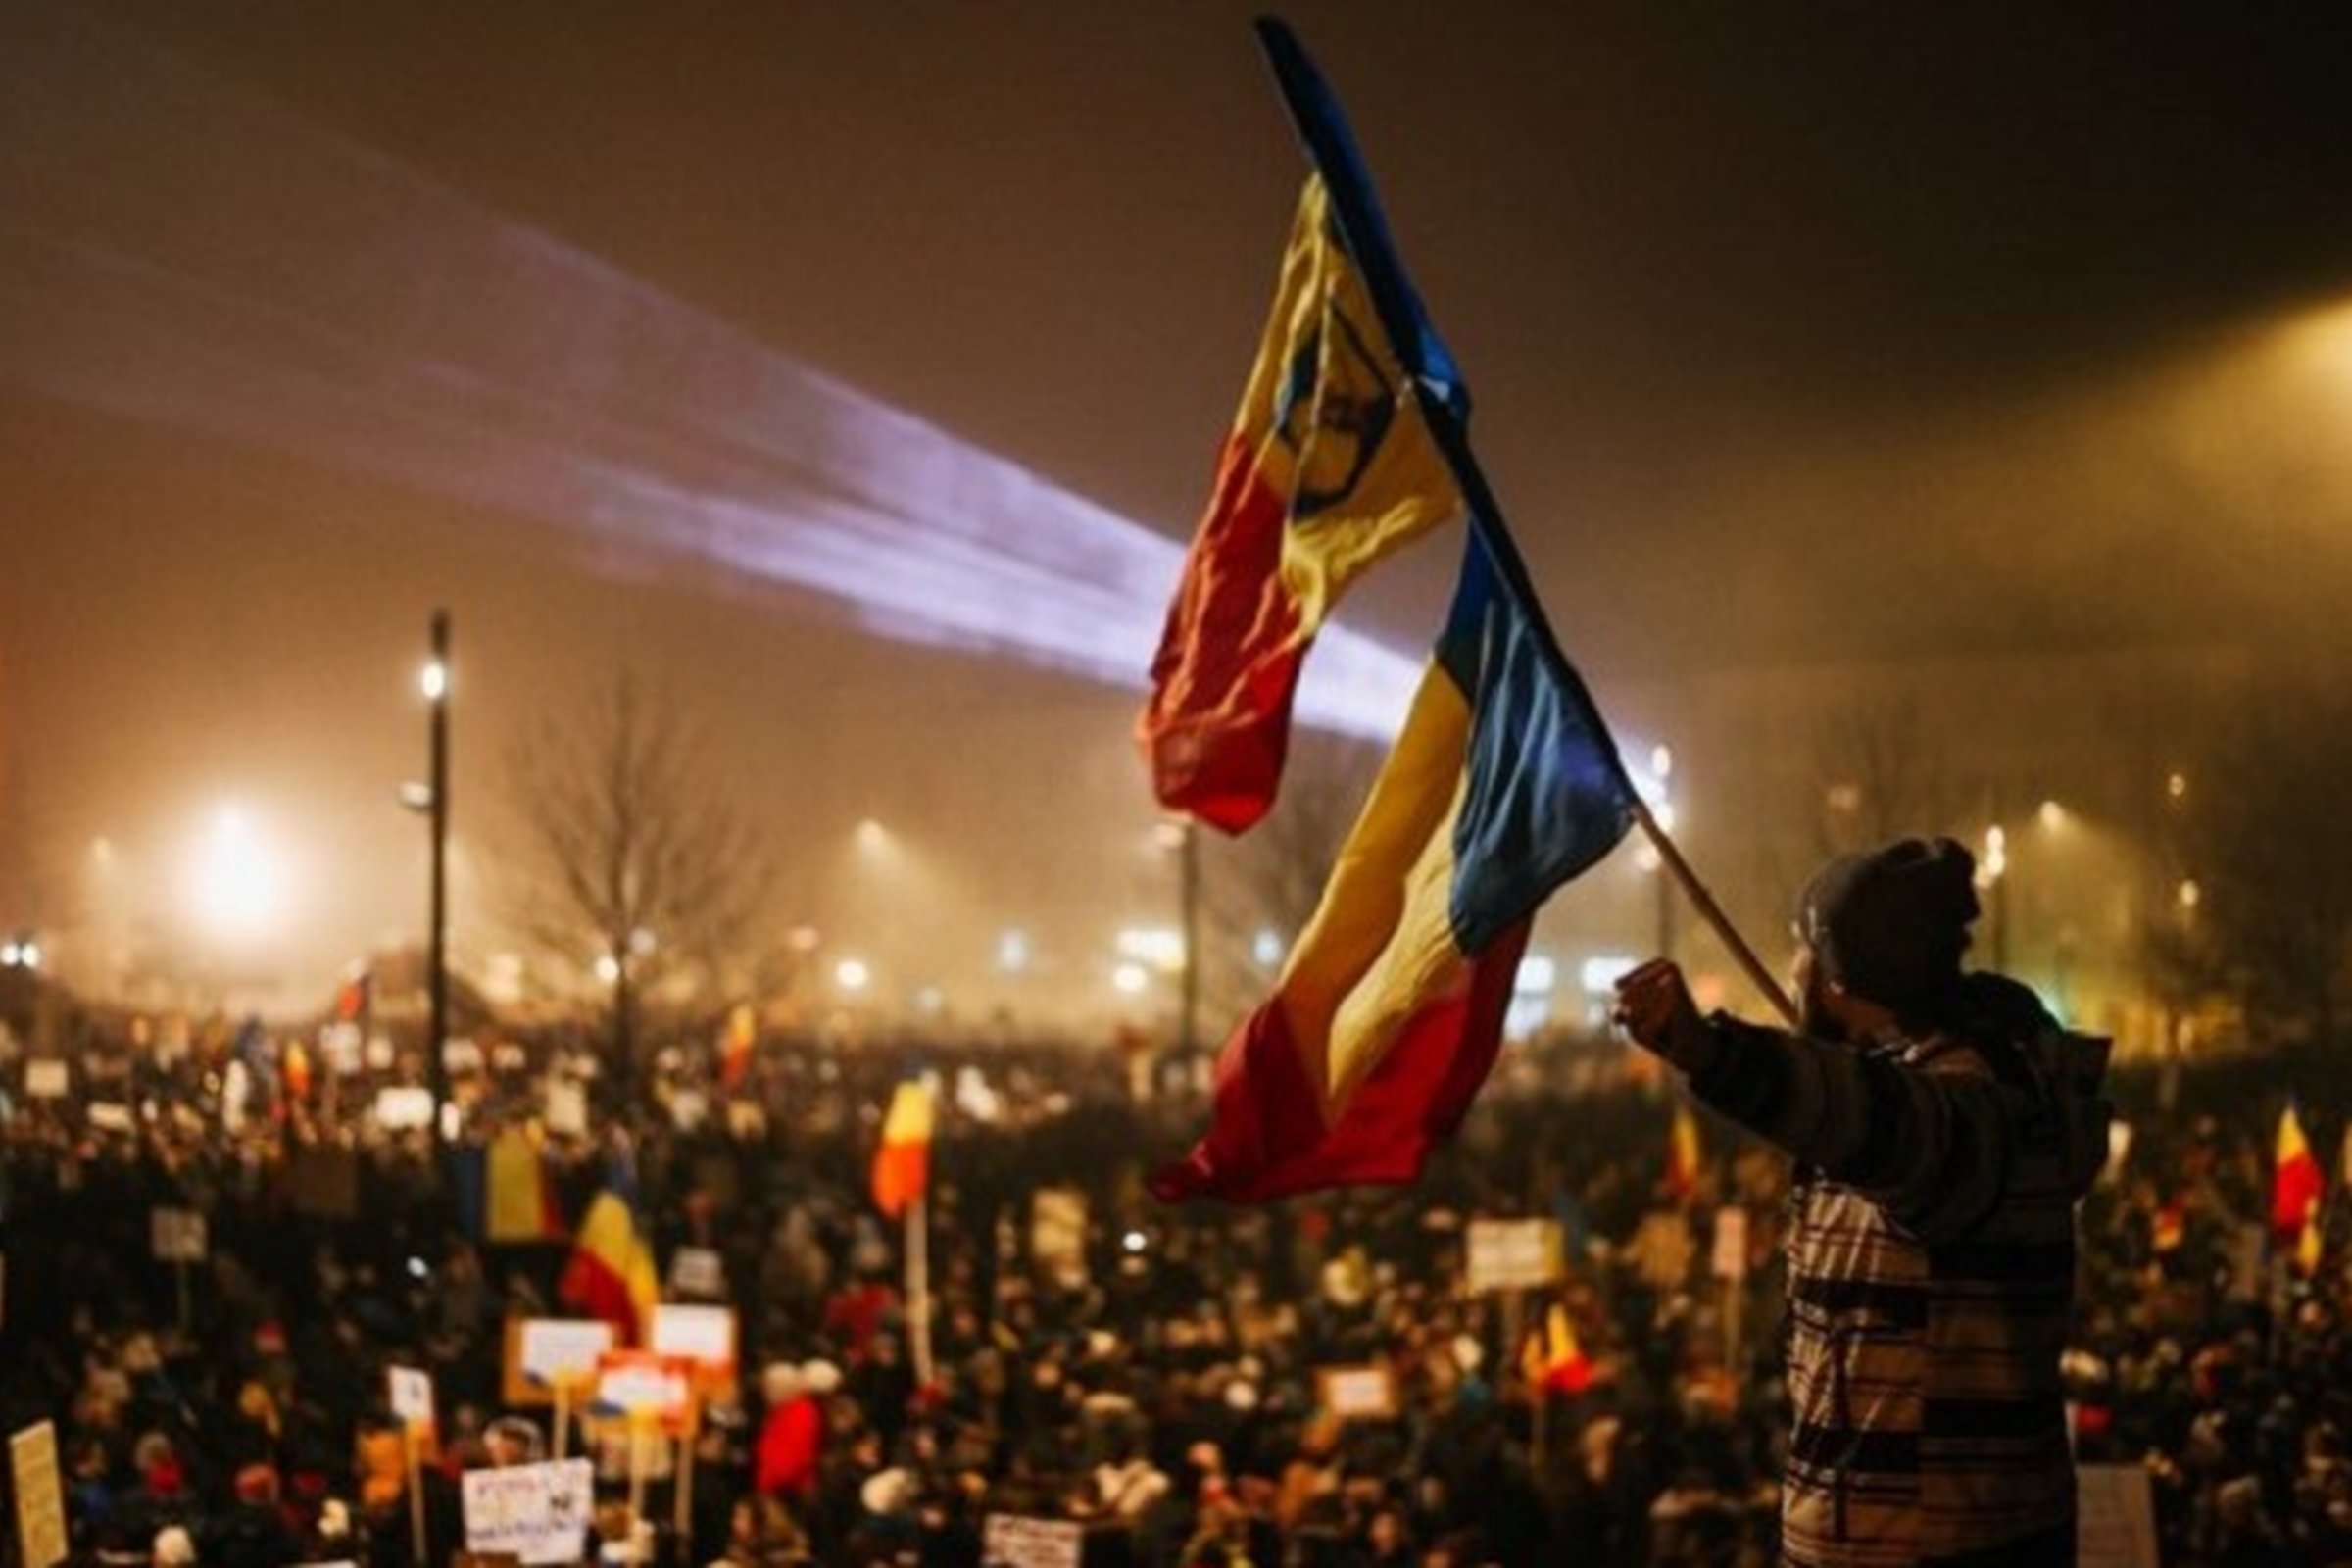 Romania’s protests and the Romanian Christian community